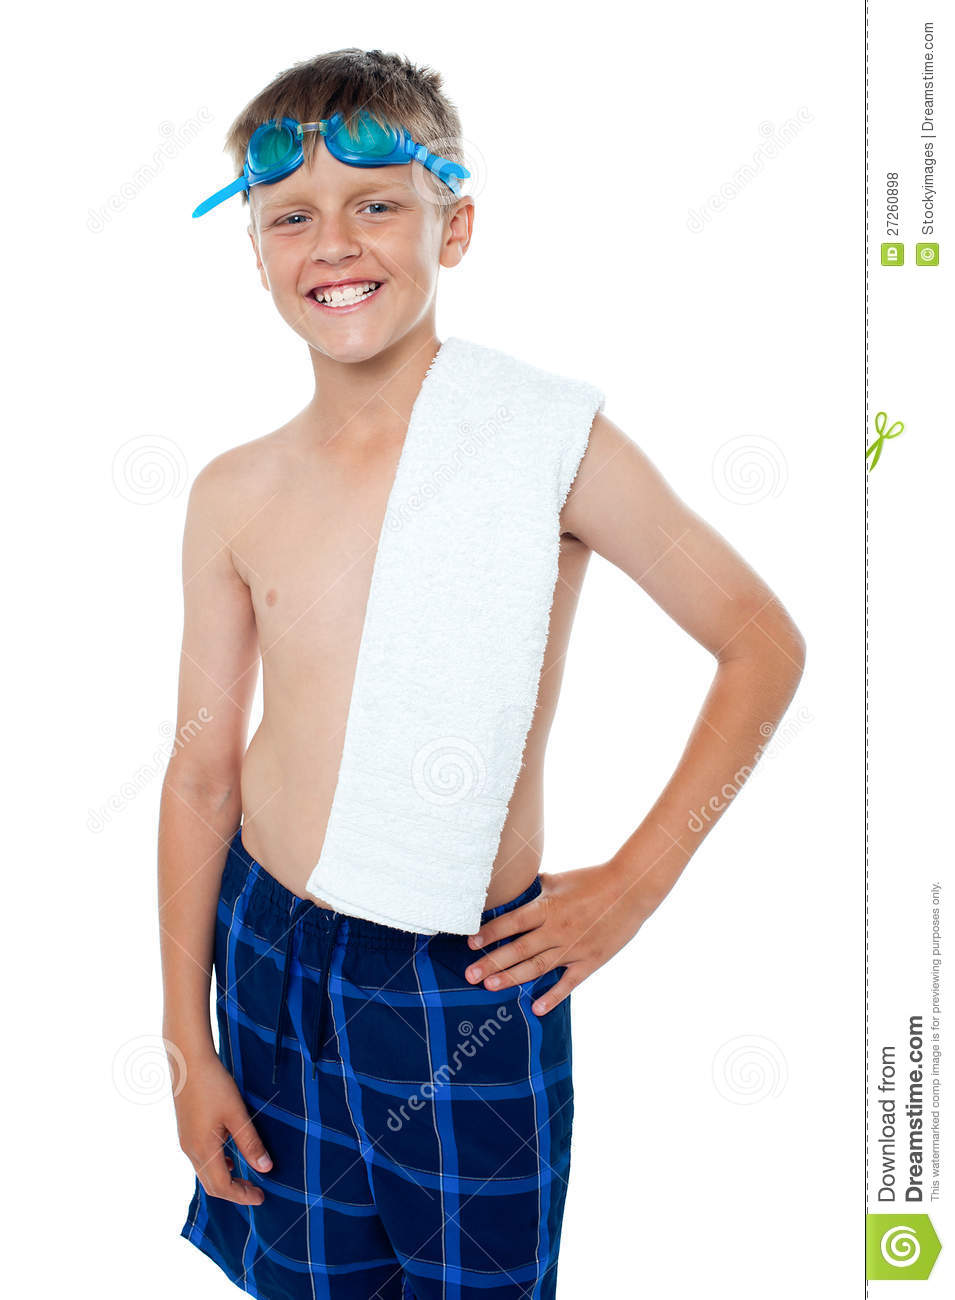 Happy 13 Years Old Boy With Goggles And Towel Royalty Free Stock    